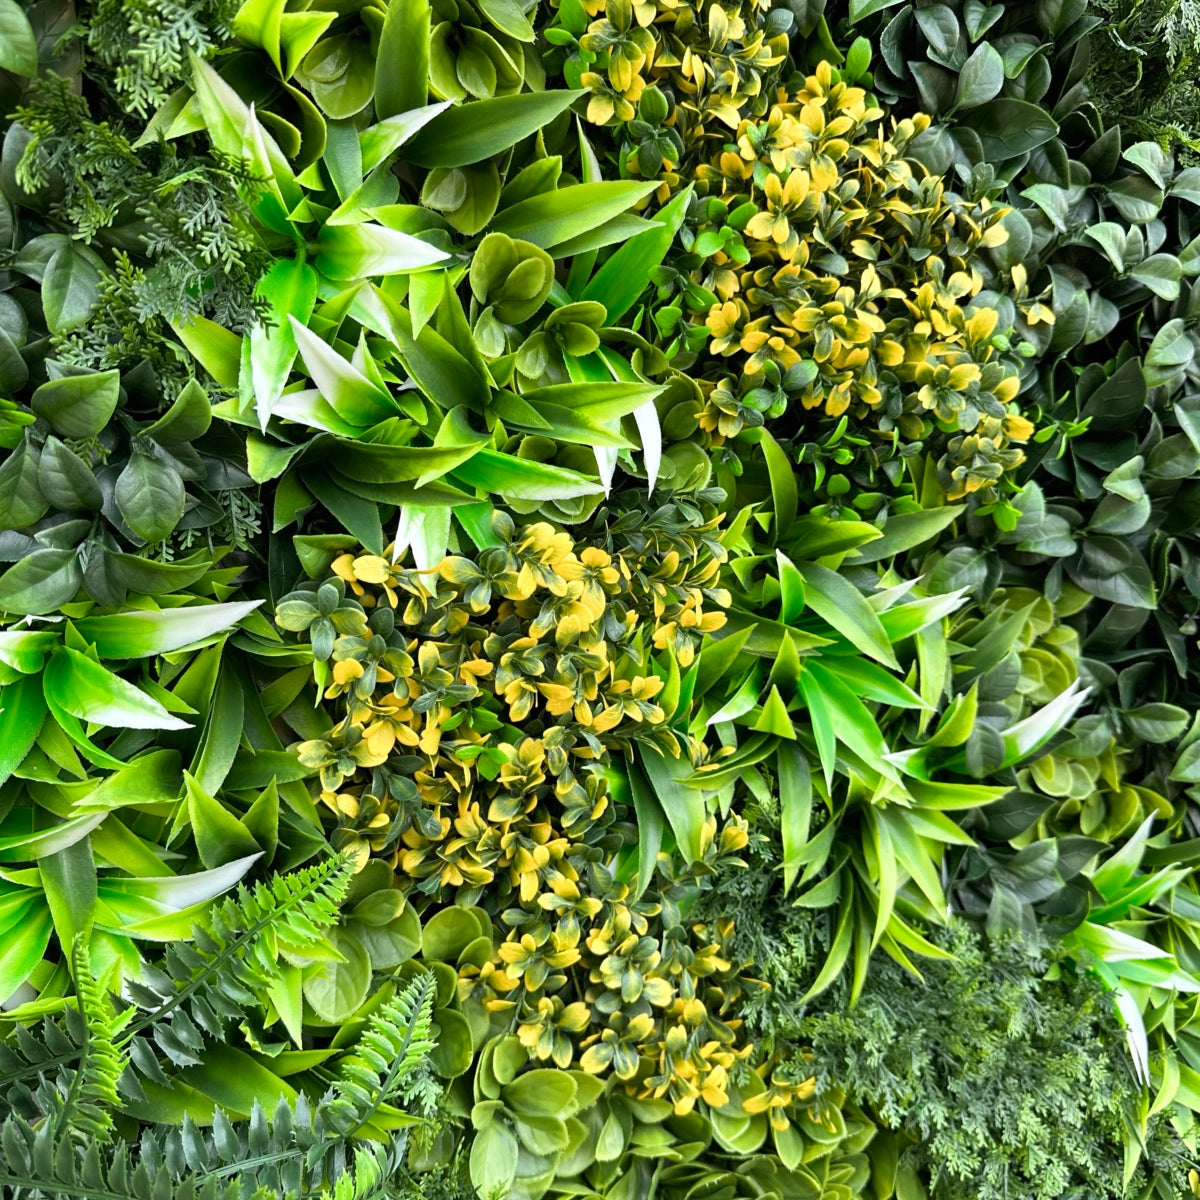 Artificial green wall panel with ferns small yellow leaves and oyster plants 100x100 cm close up view